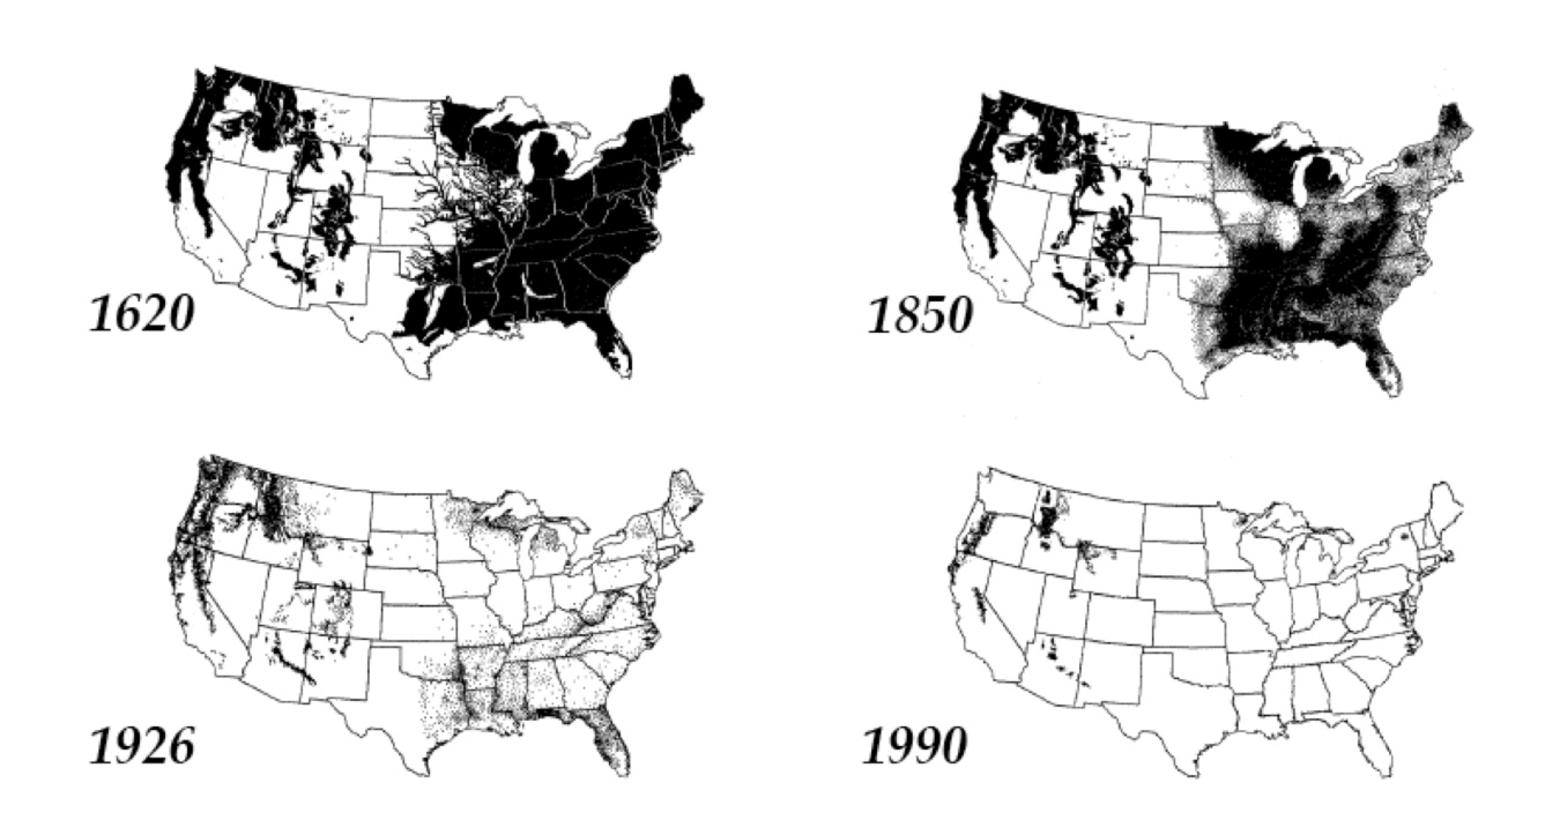 Forested areas never harvested by European settlers or their descendants, 1620 to 1990. Map courtesy Pennsylvania State University